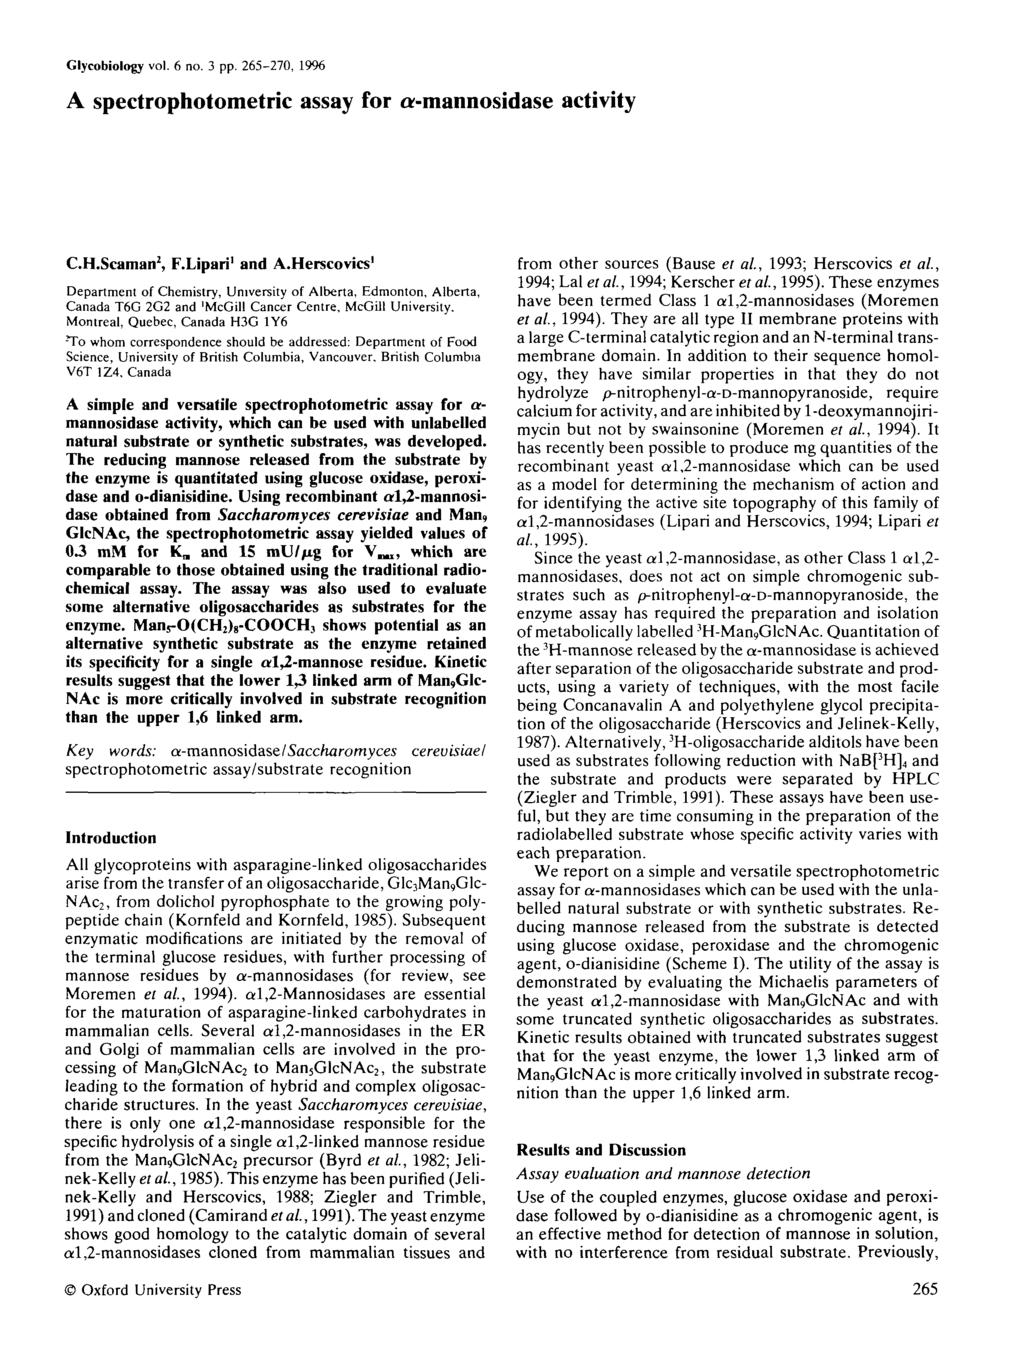 Glycobiology vol. 6 no. 3 pp. 265-270, 1996 A spectrophotometric assay for a-mannosidase activity C.H.Scaman 2, F.Lipari 1 and A.